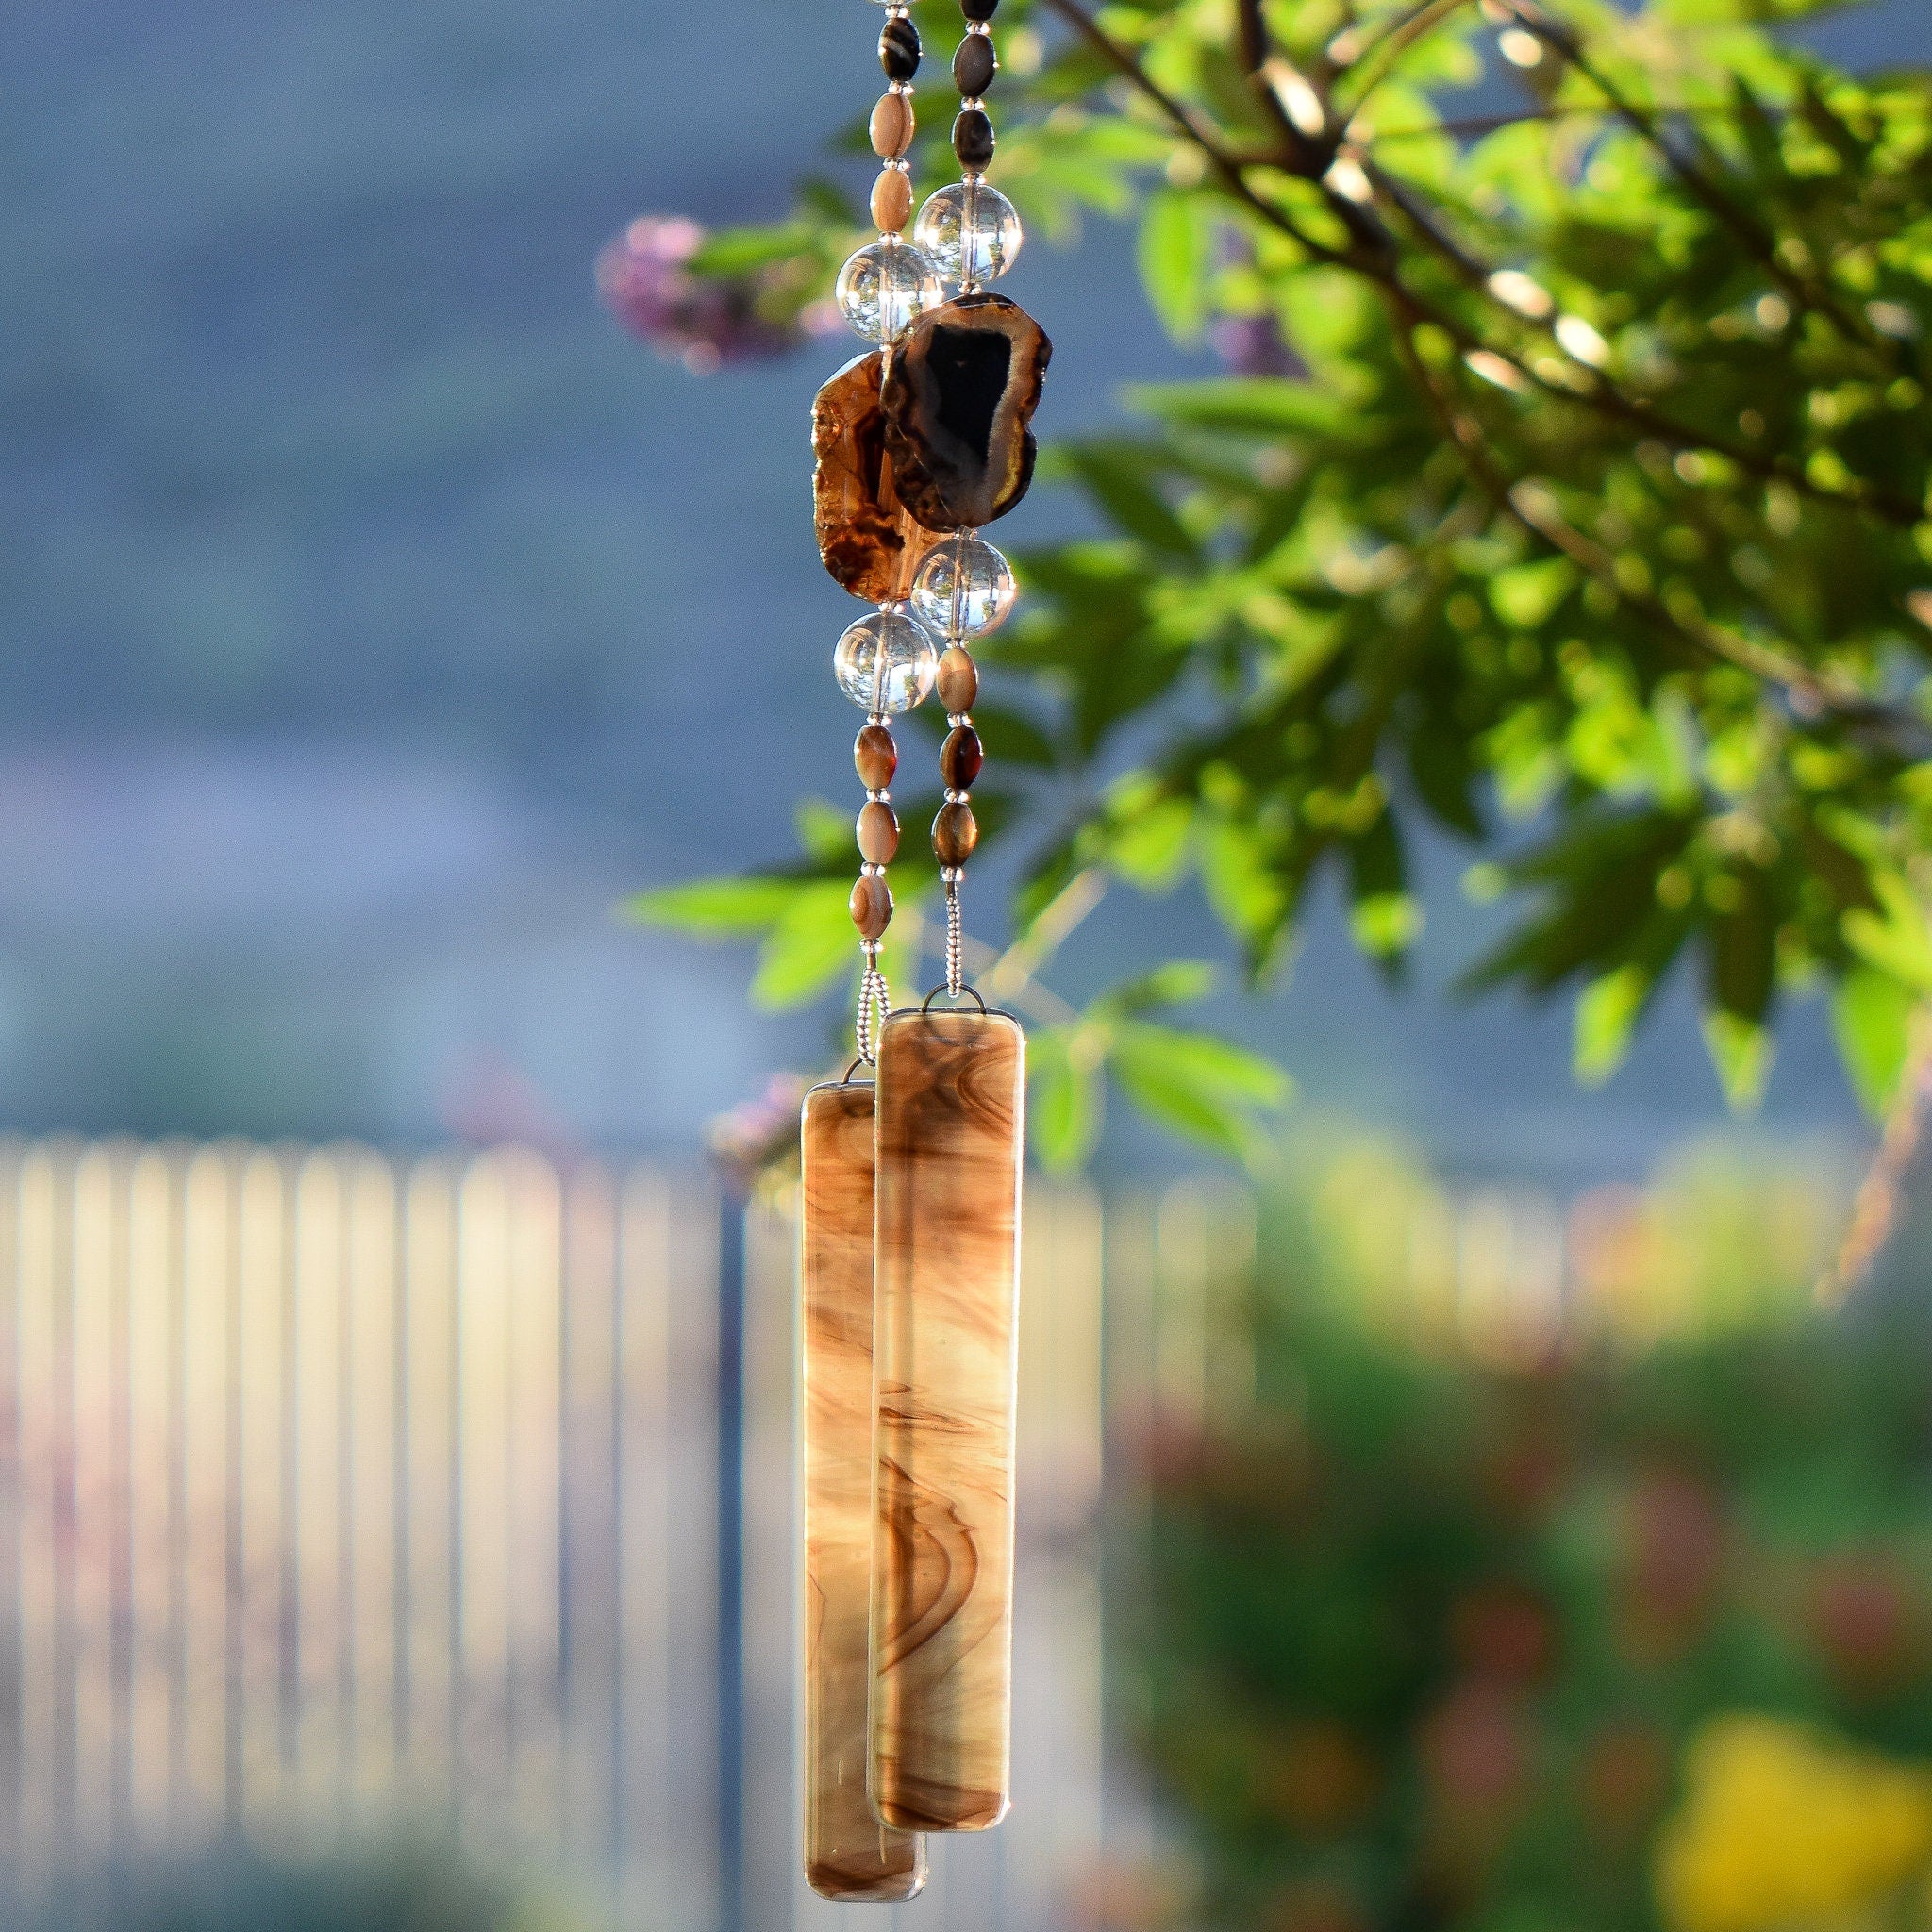 Black Agate Sun-Catcher Wind Chime with Fused Glass for the Patio or Garden